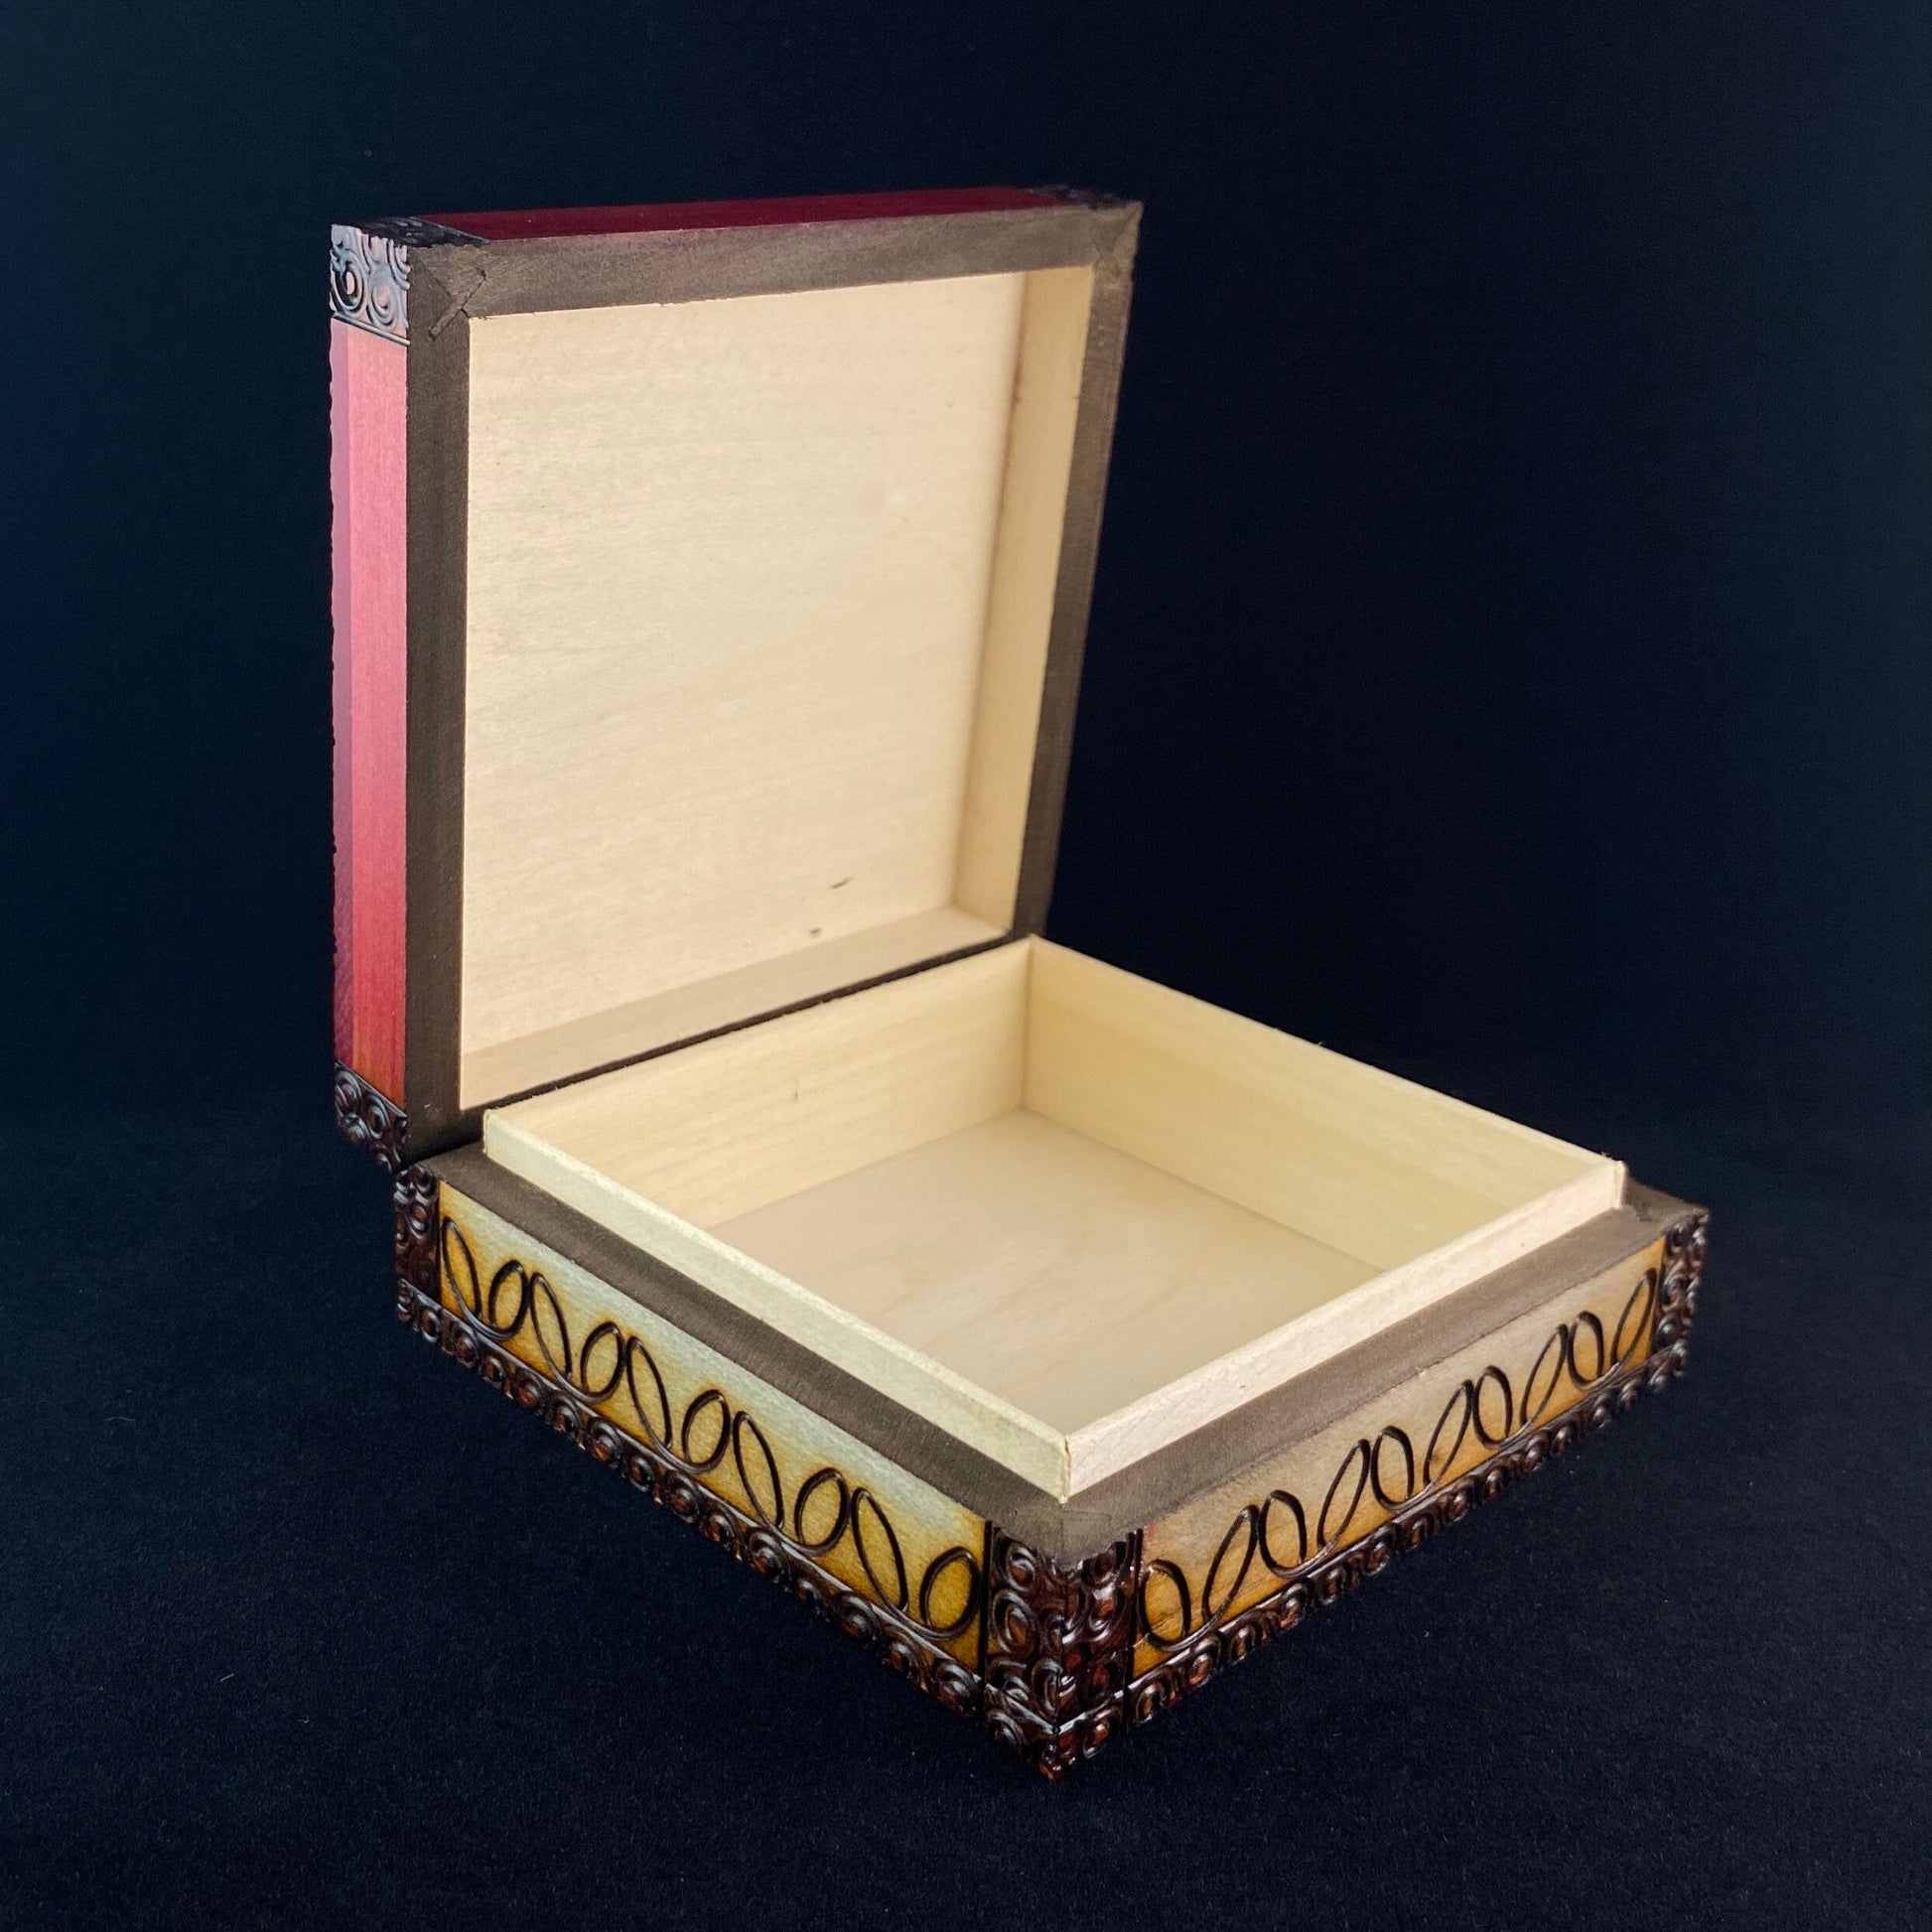 Floral Patterned Jewelry Box With Brass Inlays, Handmade Hinged Wooden Treasure Box